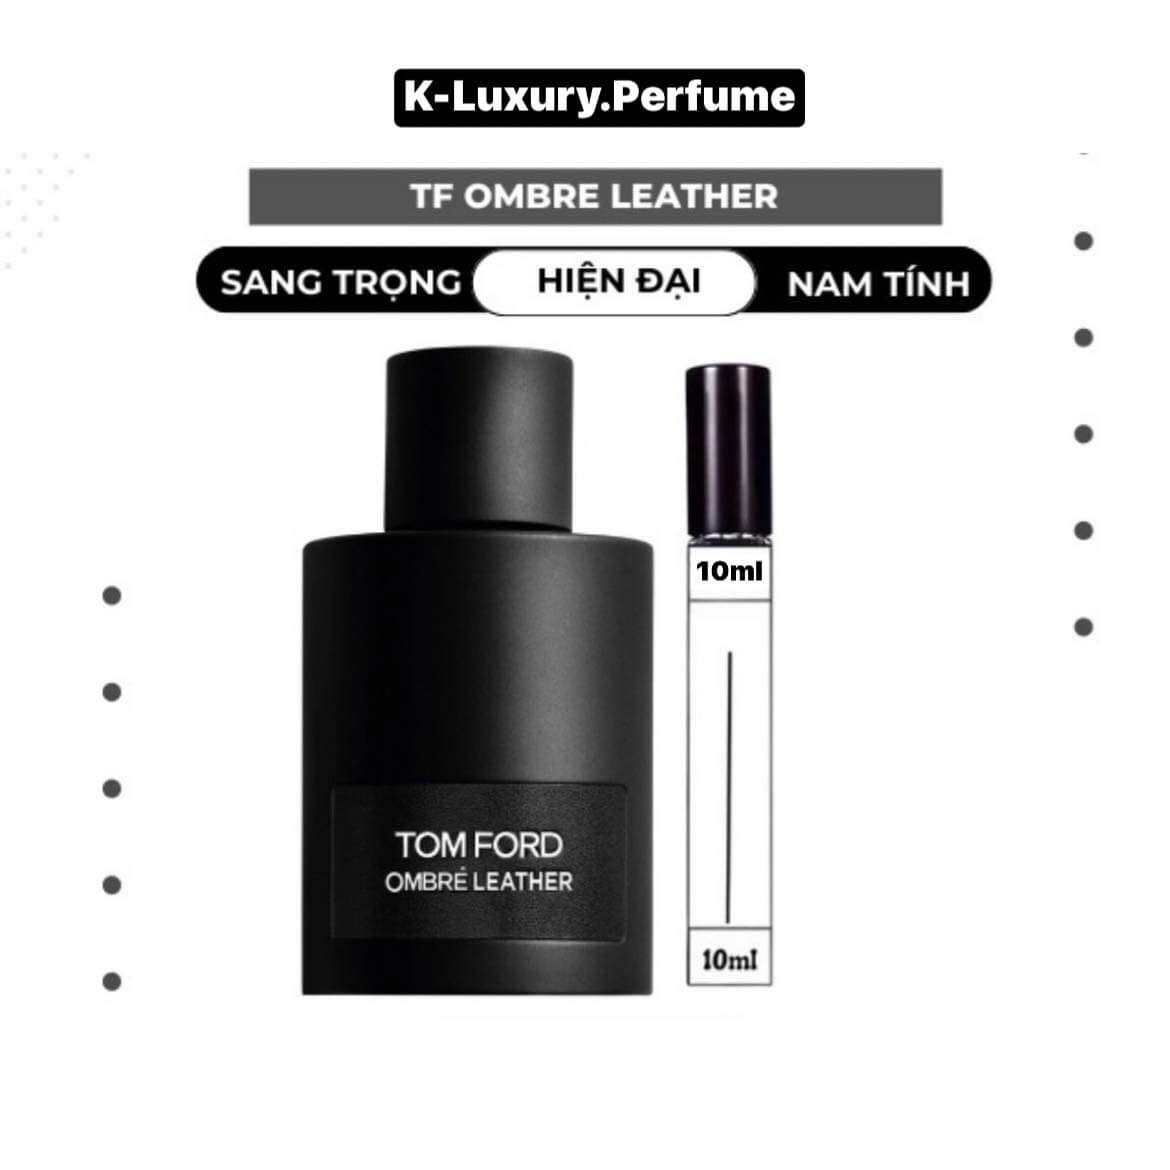 Tom Ford- auth Nước hoa chiết unisex Tom Ford Ombre Leather chiết 10ml